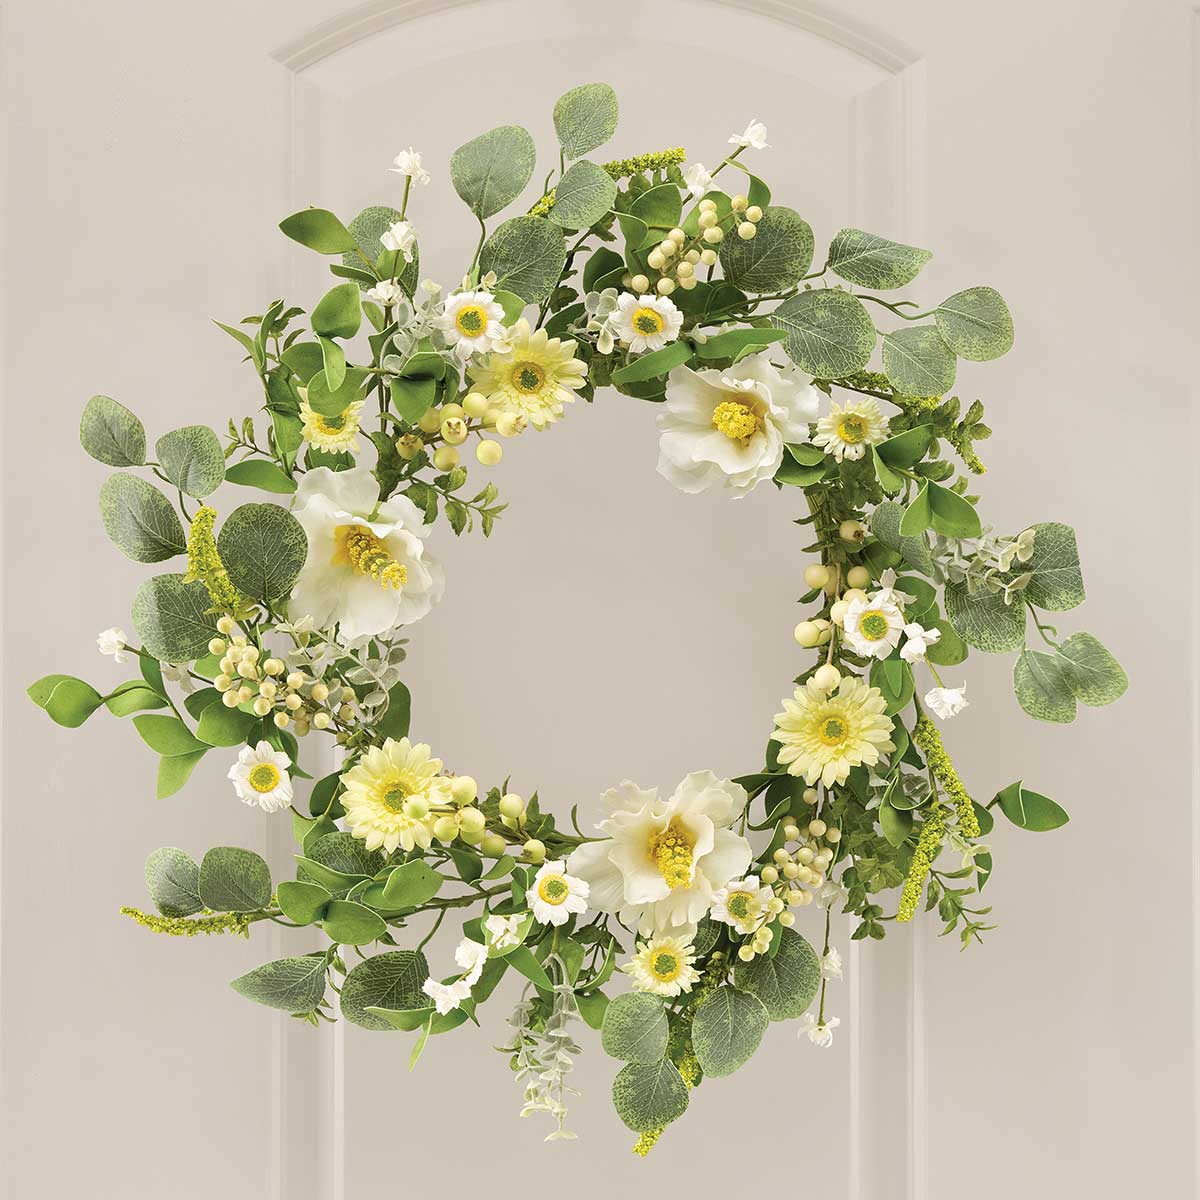 WREATH HIBISCUS/DAISY 22IN (INNER RING 11IN) POLYESTER/PAPER